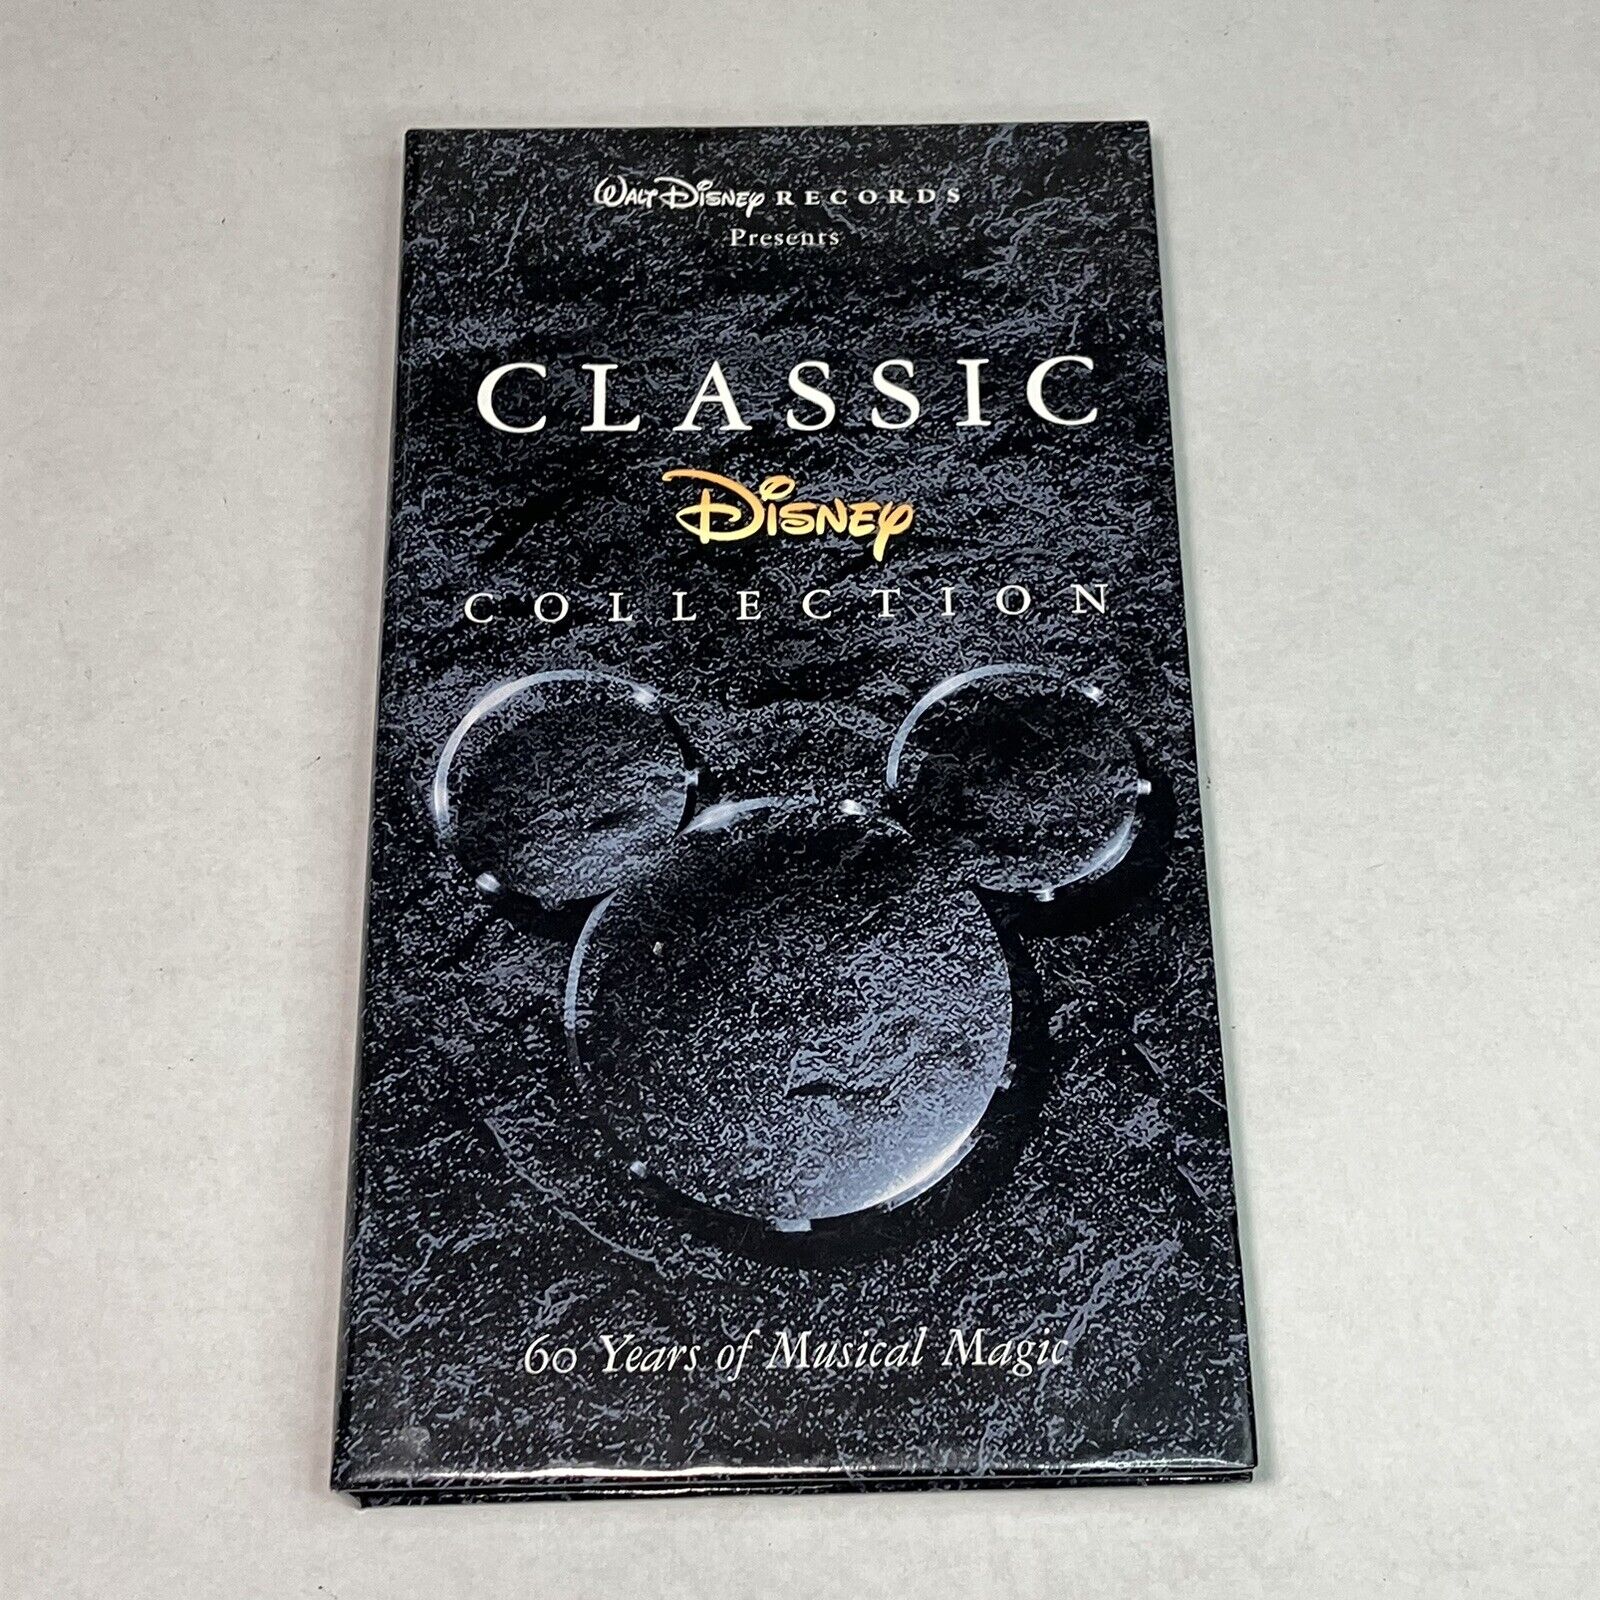 Classic Disney Collection 4 CD Set: 60 Years of Musical Magic with Lyric Book